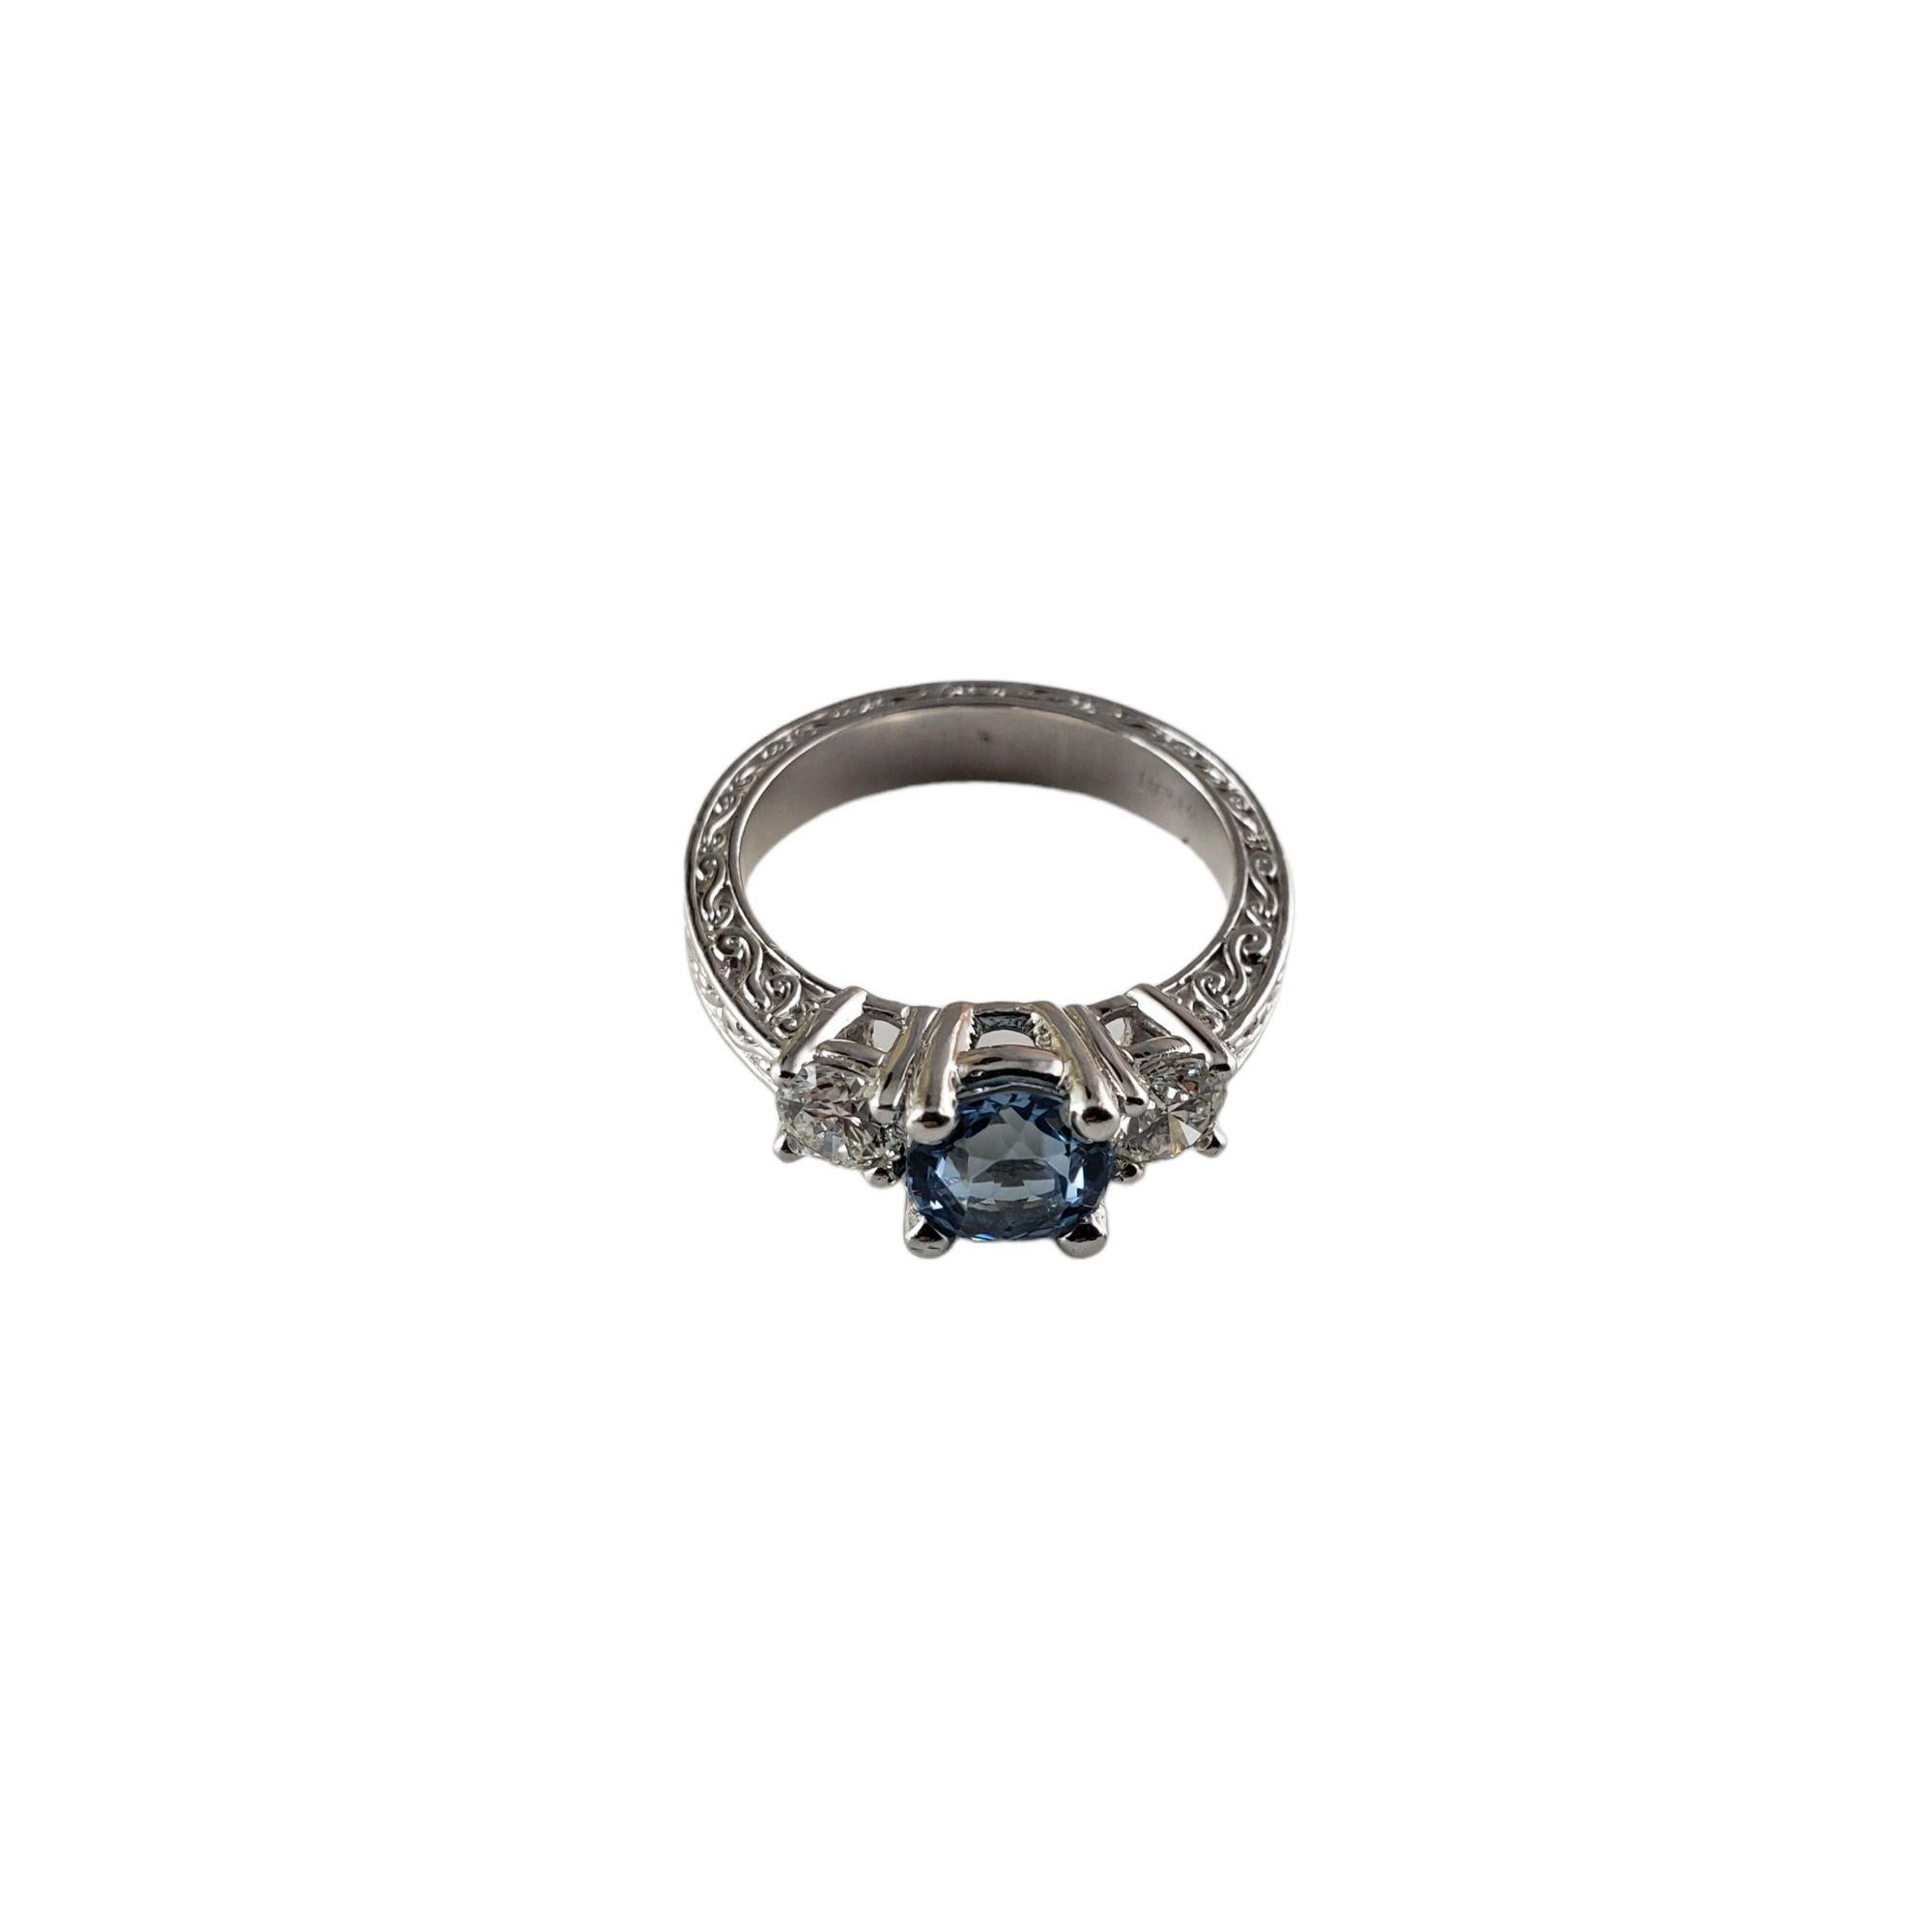 Vintage Platinum Topaz and Diamond Ring Size 5.5 JAGi Certified-

This lovely ring features one round blue topaz (6 mm) and two round brilliant cut diamonds set in classic platinum. Shank: 3.5 mm.

Topaz weight: 1.03 ct.

Total diamond weight: .48